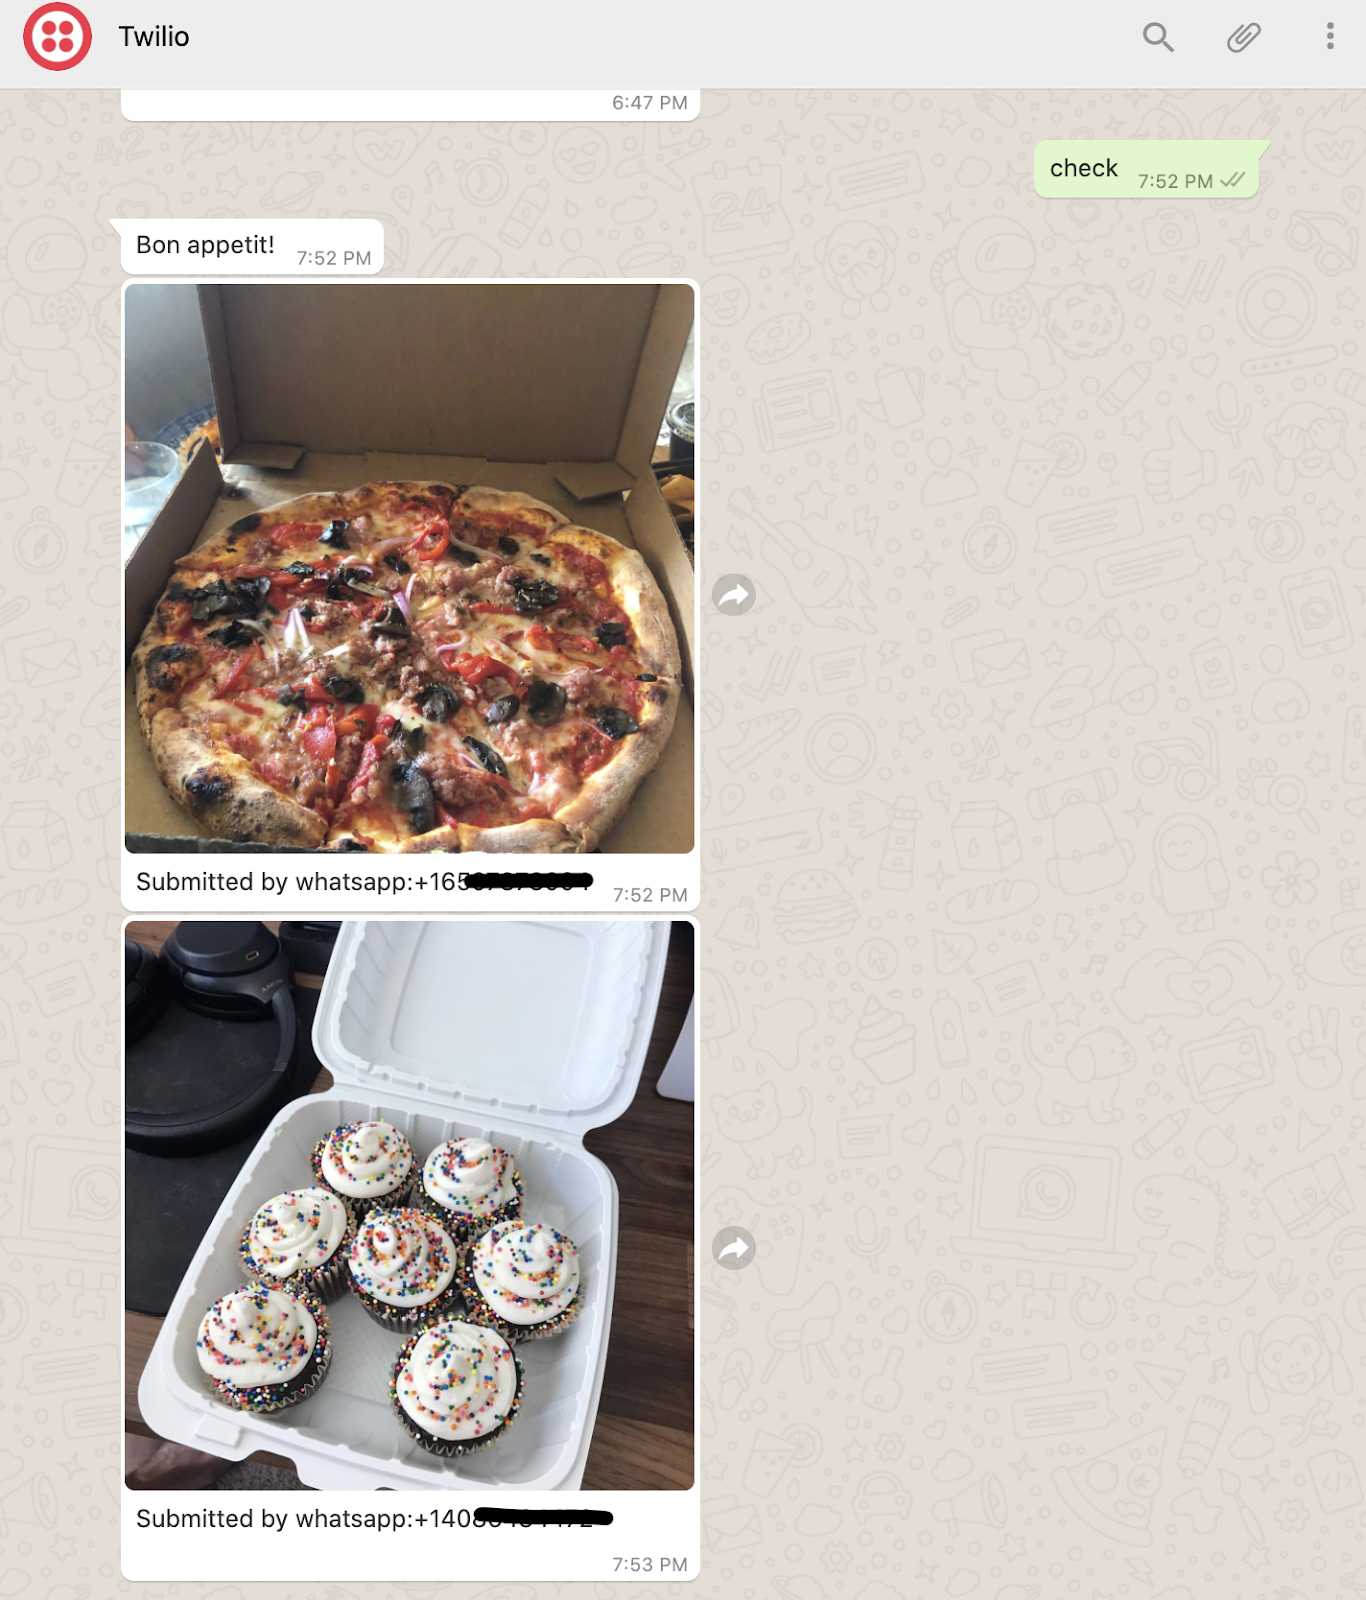 screenshot of user texting "check" and WhatsApp responding with two pictures of food and a caption